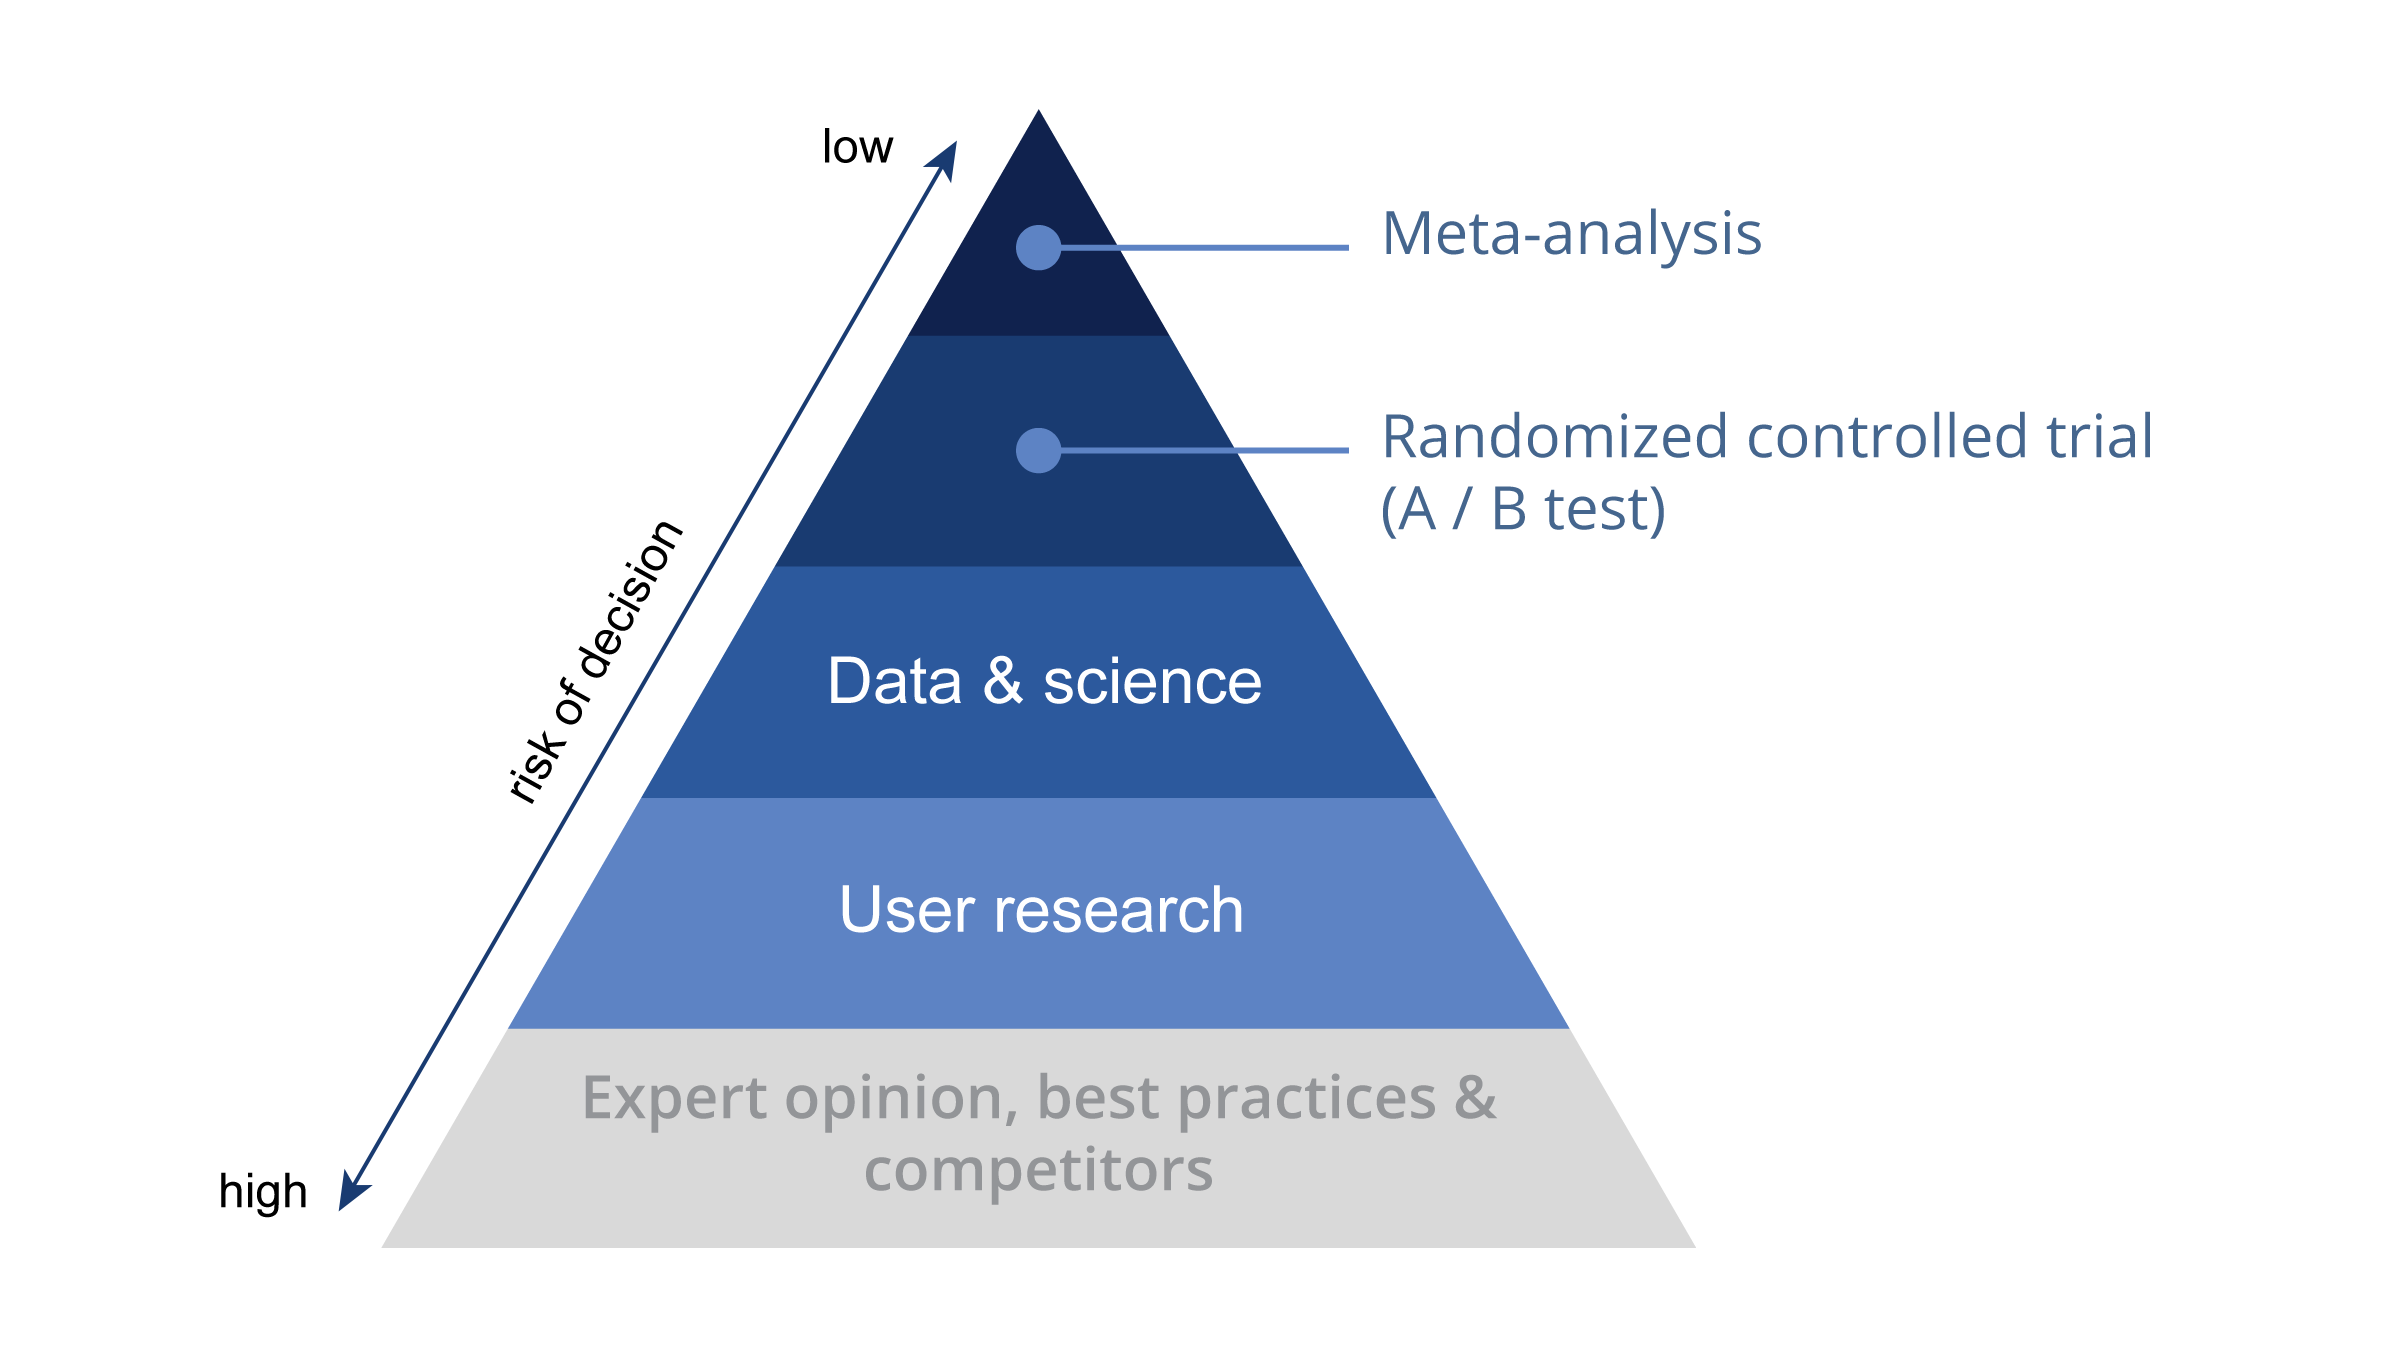 Pyramide of evidence showing the risk of decision for several research methods. From high to low risk being; expert opinion, user research, data & science, A/B test, and meta analysis.